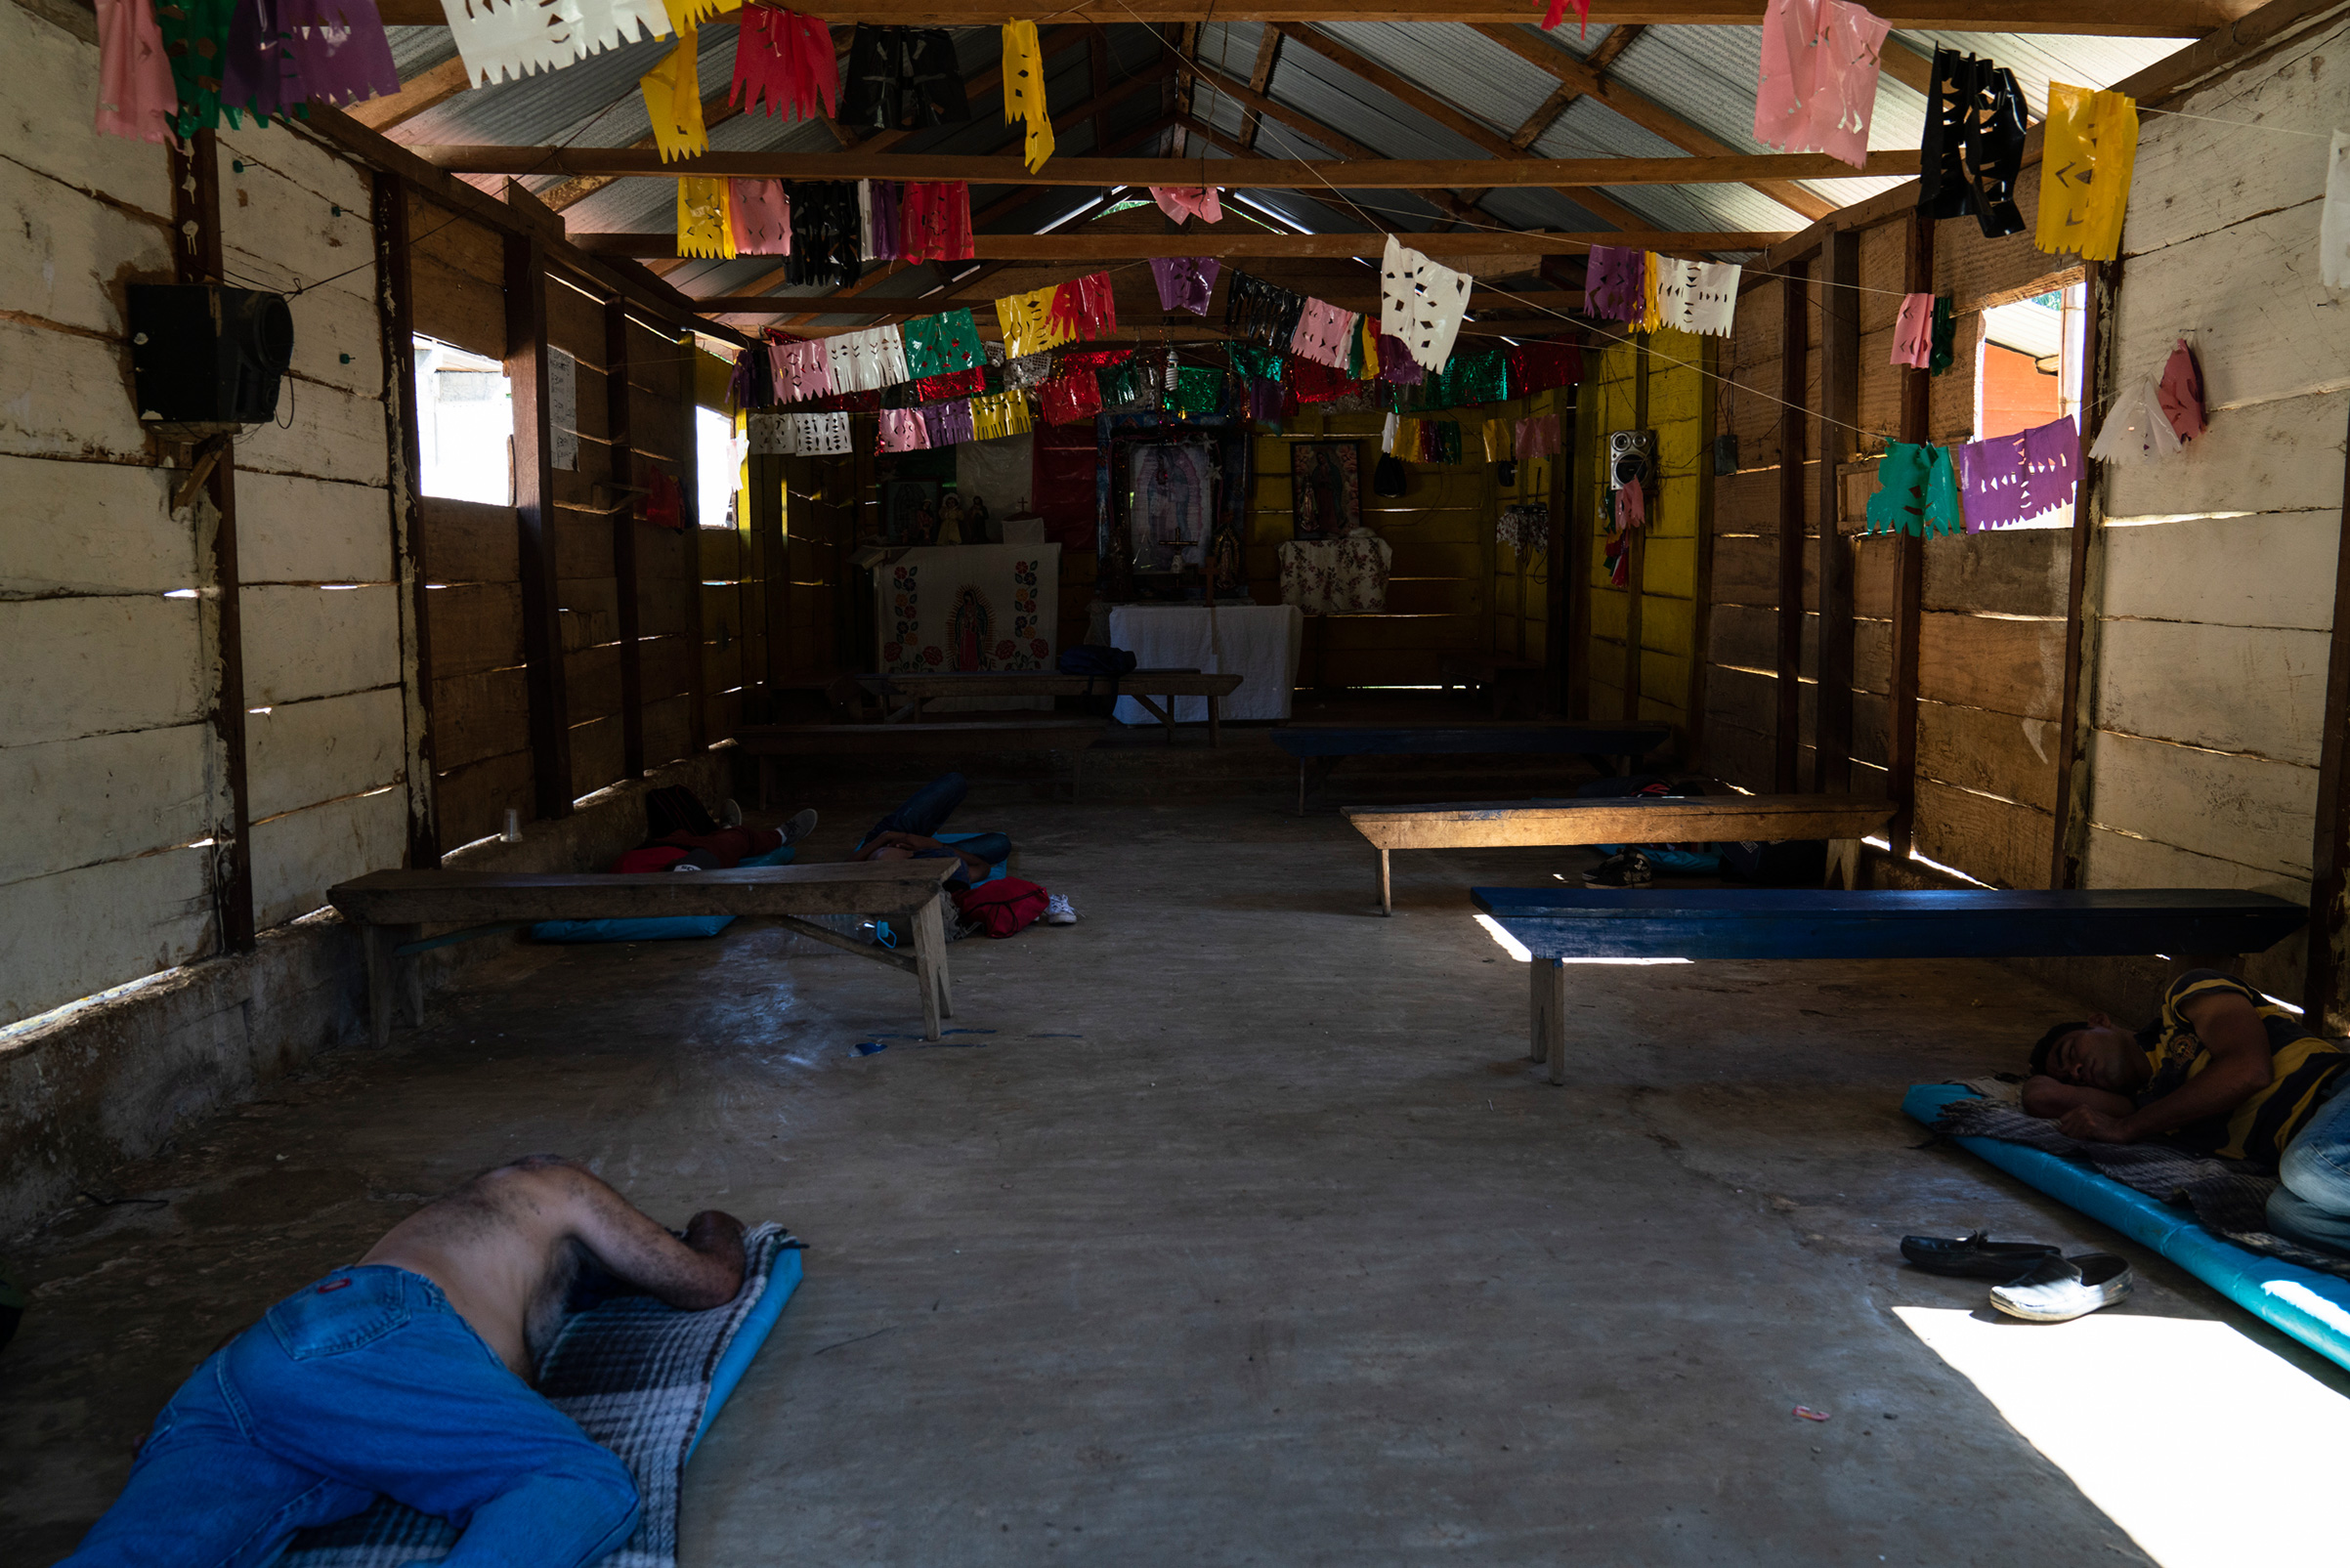 Honduran migrants Juan Ramón Andino, 60, left and José, 40, right, sleep in a church that also serves as a migrant shelter in General Emiliano Zapata del Valle near Palenque, Chiapas, on Oct. 24. The shelter is located along highway 307, known as "The Great Pacific Corridor of the Migrant," and is a common route for Honduran migrants. (Veronica G. Cardenas for TIME)